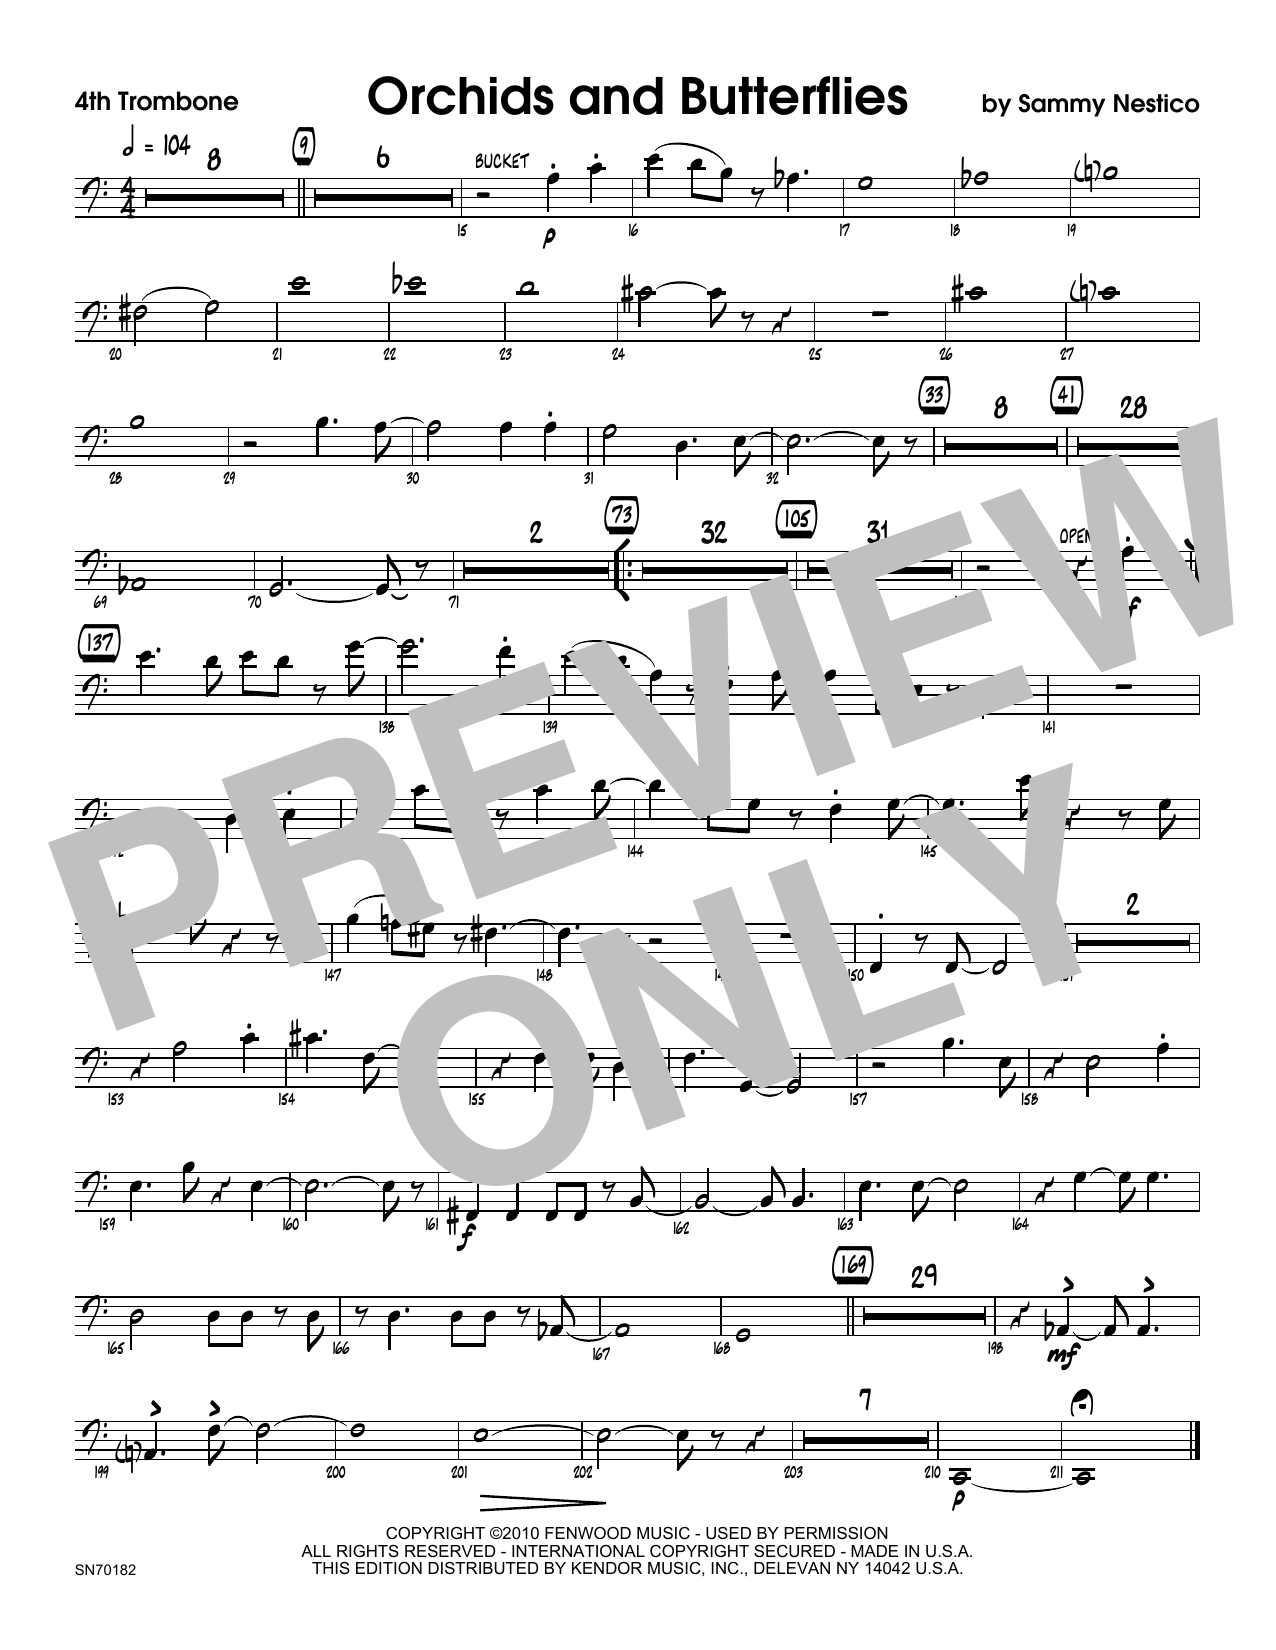 Download Sammy Nestico Orchids And Butterflies - 4th Trombone Sheet Music